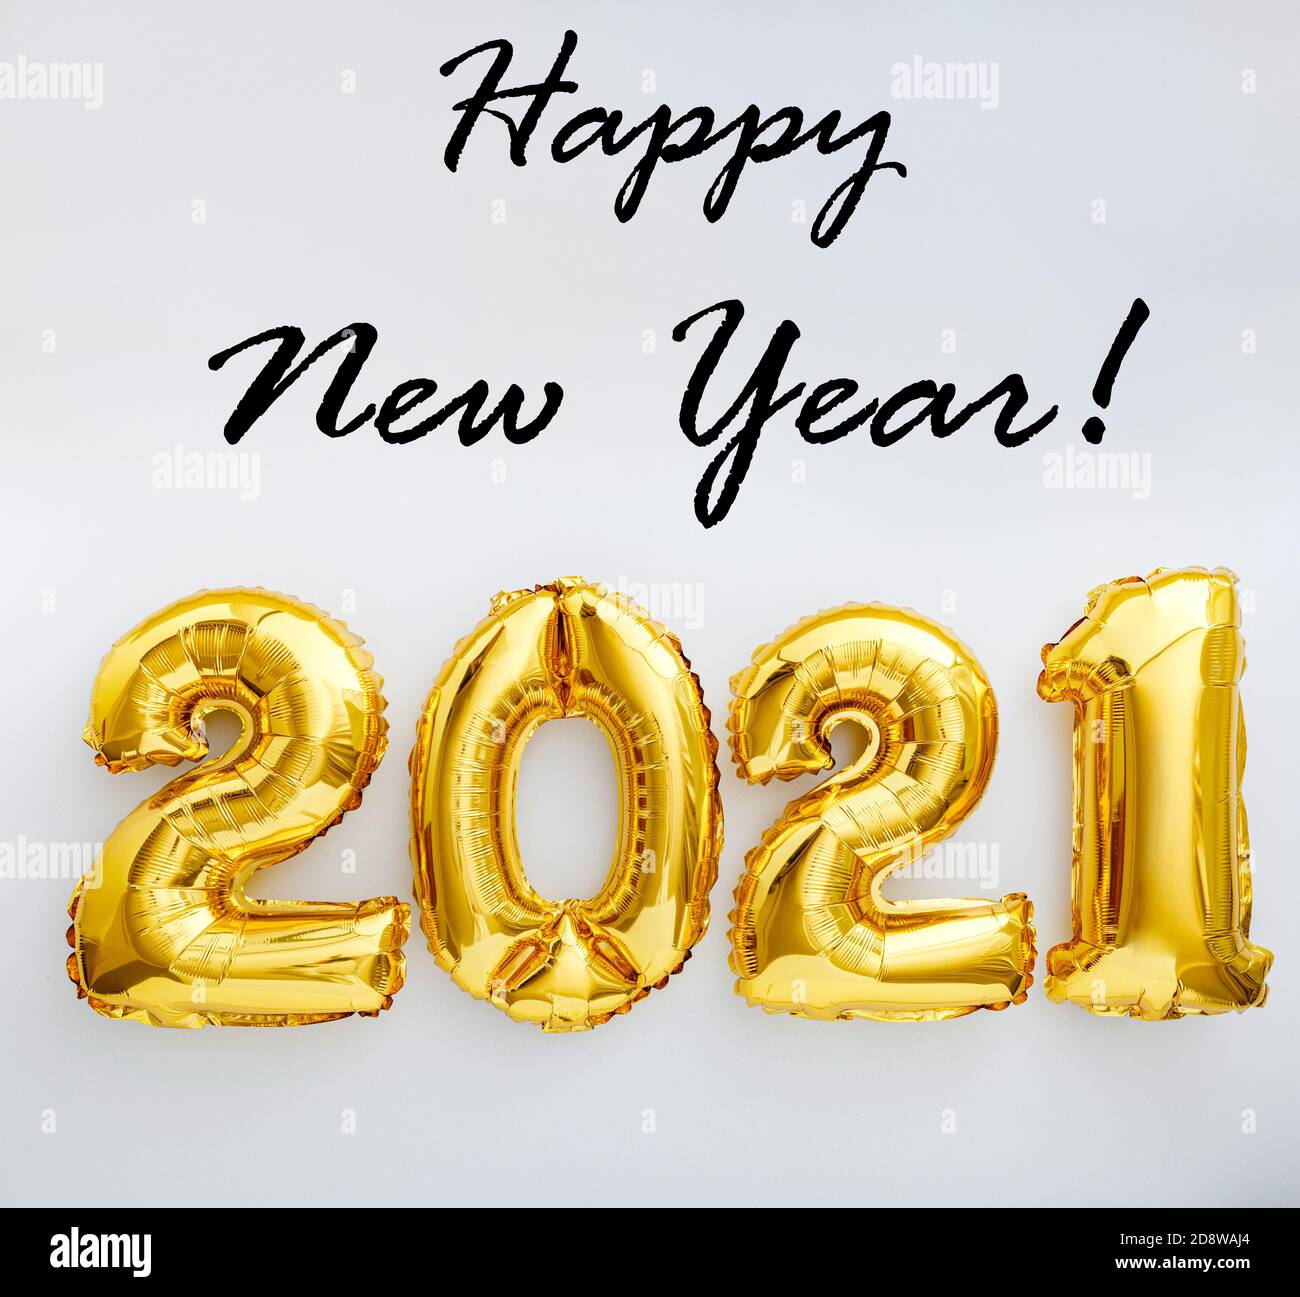 Happy New year text with gold foil balloons 2021 on white background. New Year eve invitation 2021. Square flat lay Stock Photo